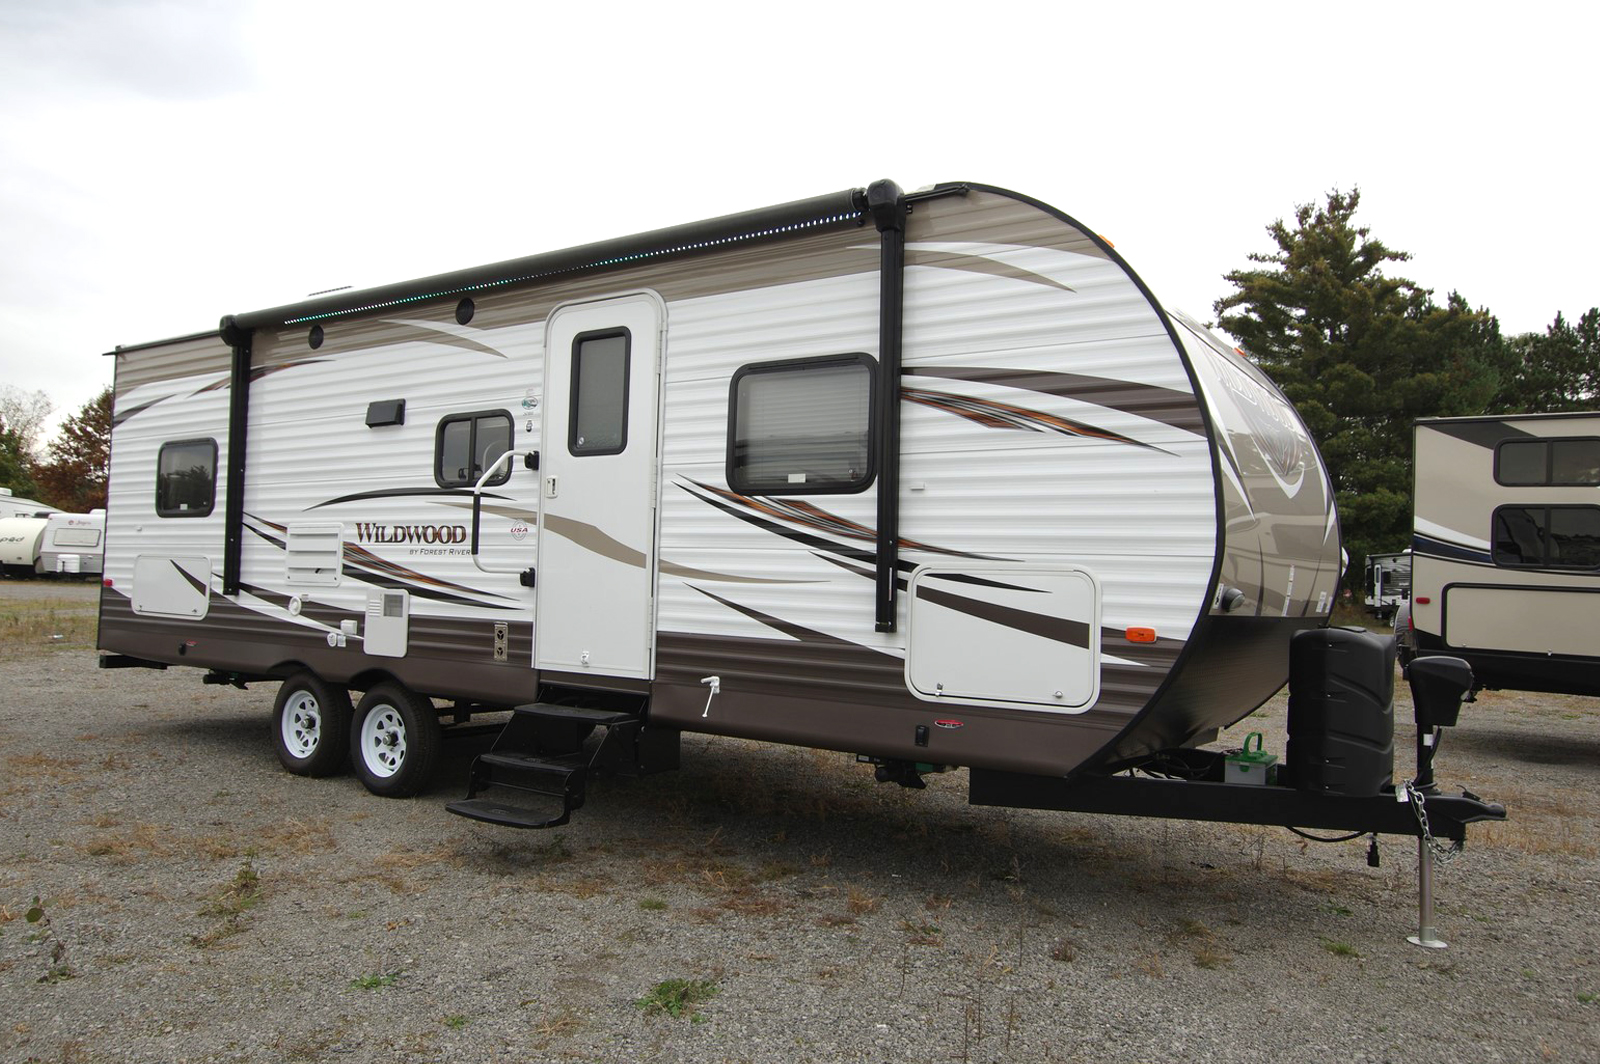 used rv for sale near me | Camper Photo Gallery Used Rv Campers For Sale By Owner Near Me